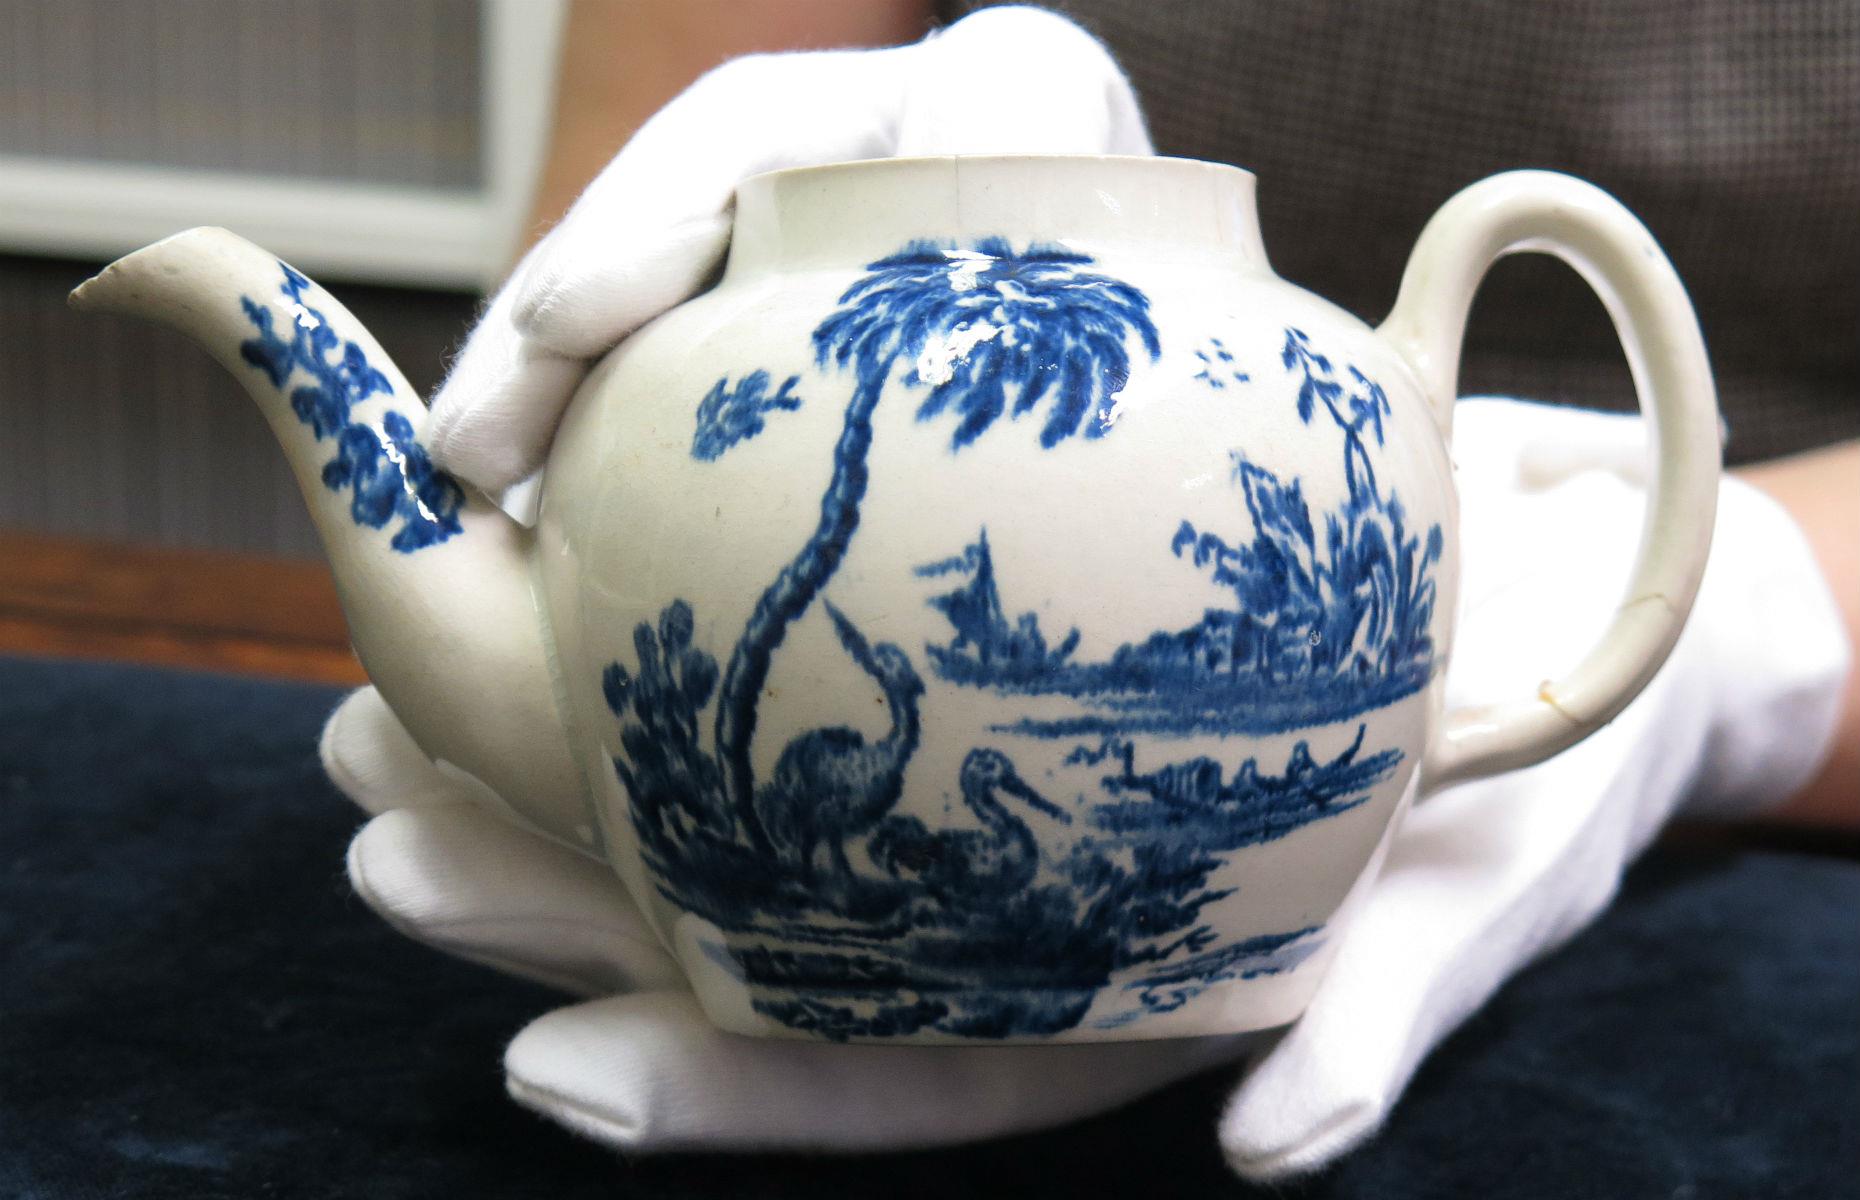 The cracked teapot sold for $748,000 (£575k)